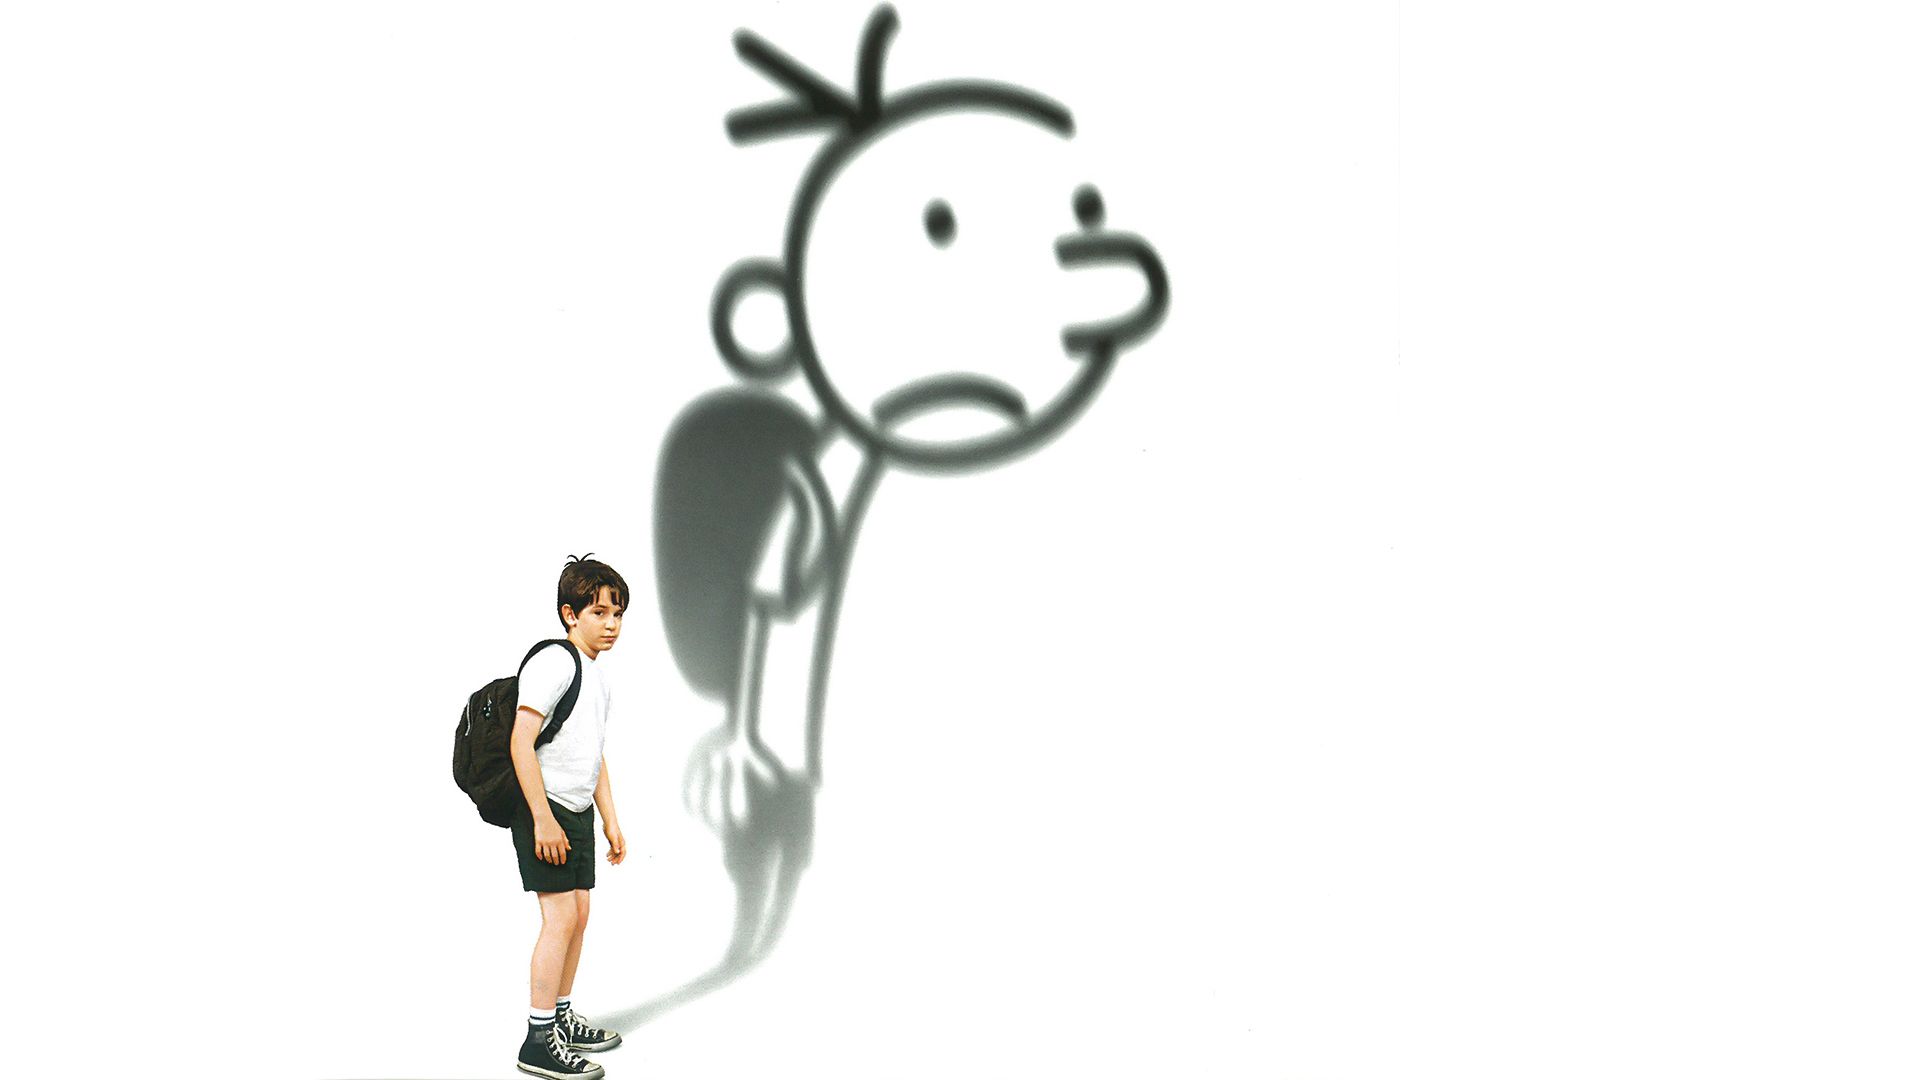 Diary of a Wimpy Kid background